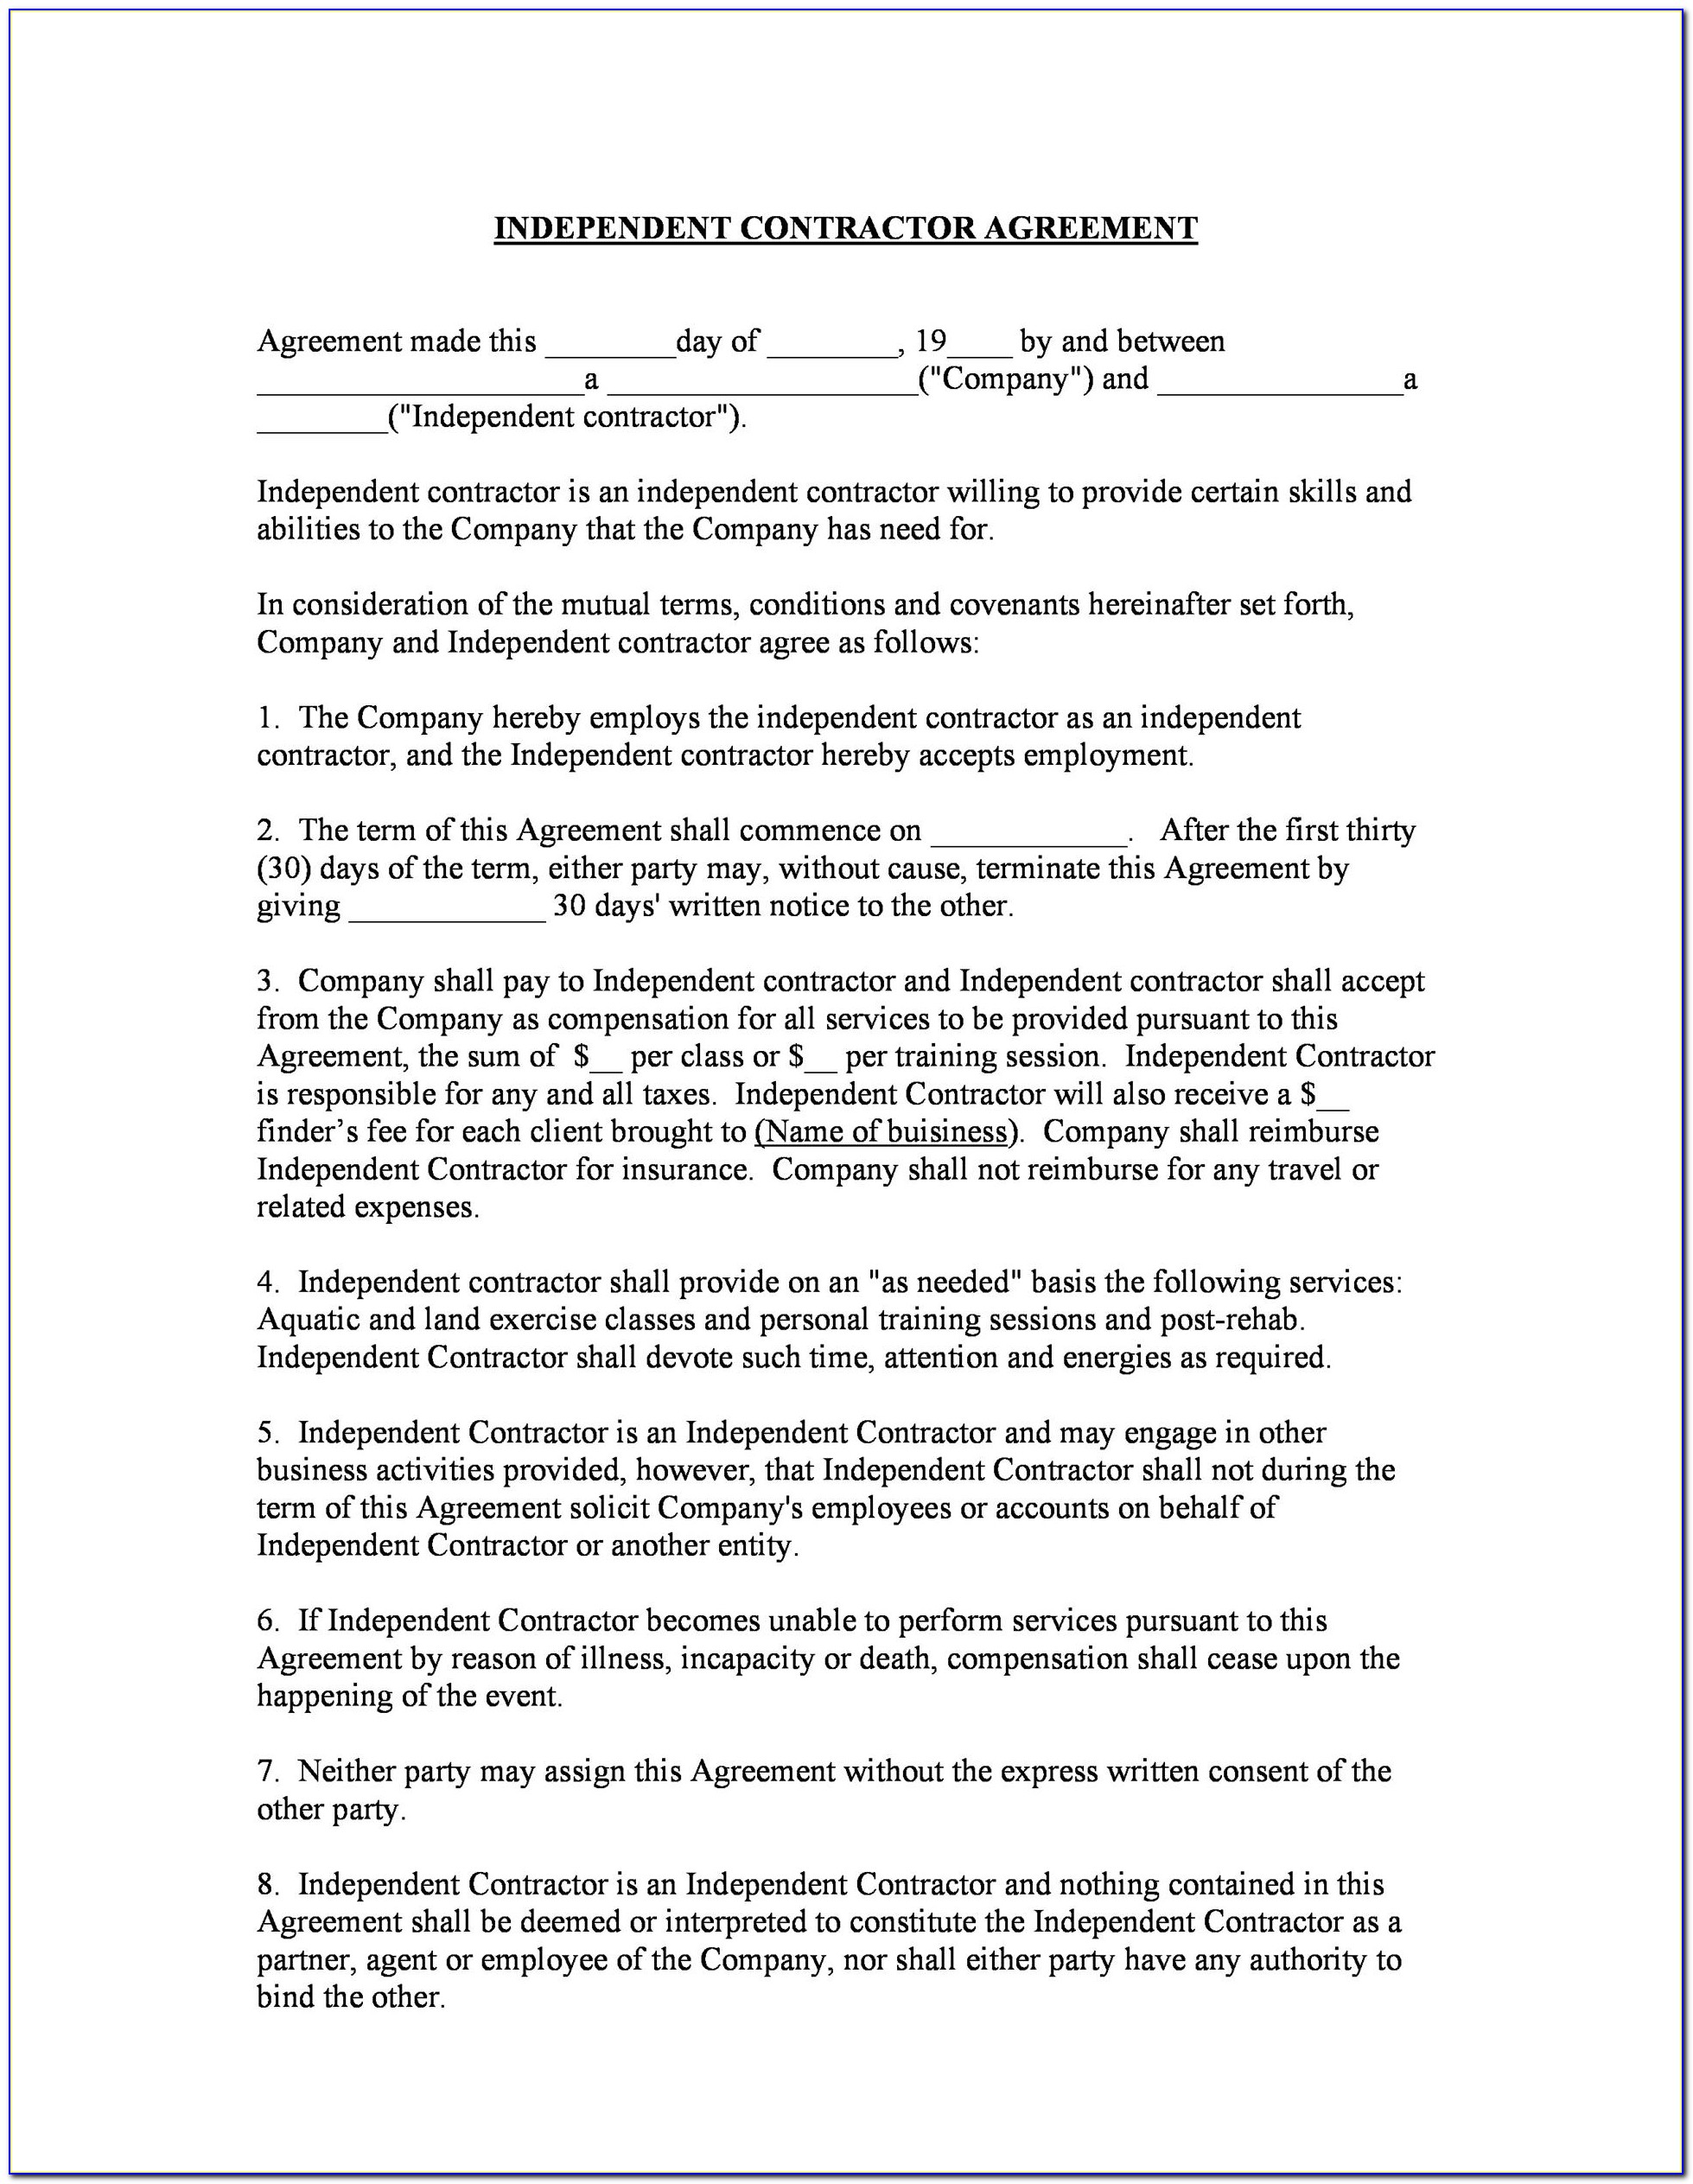 Independent Contractor Agreement Template Australia